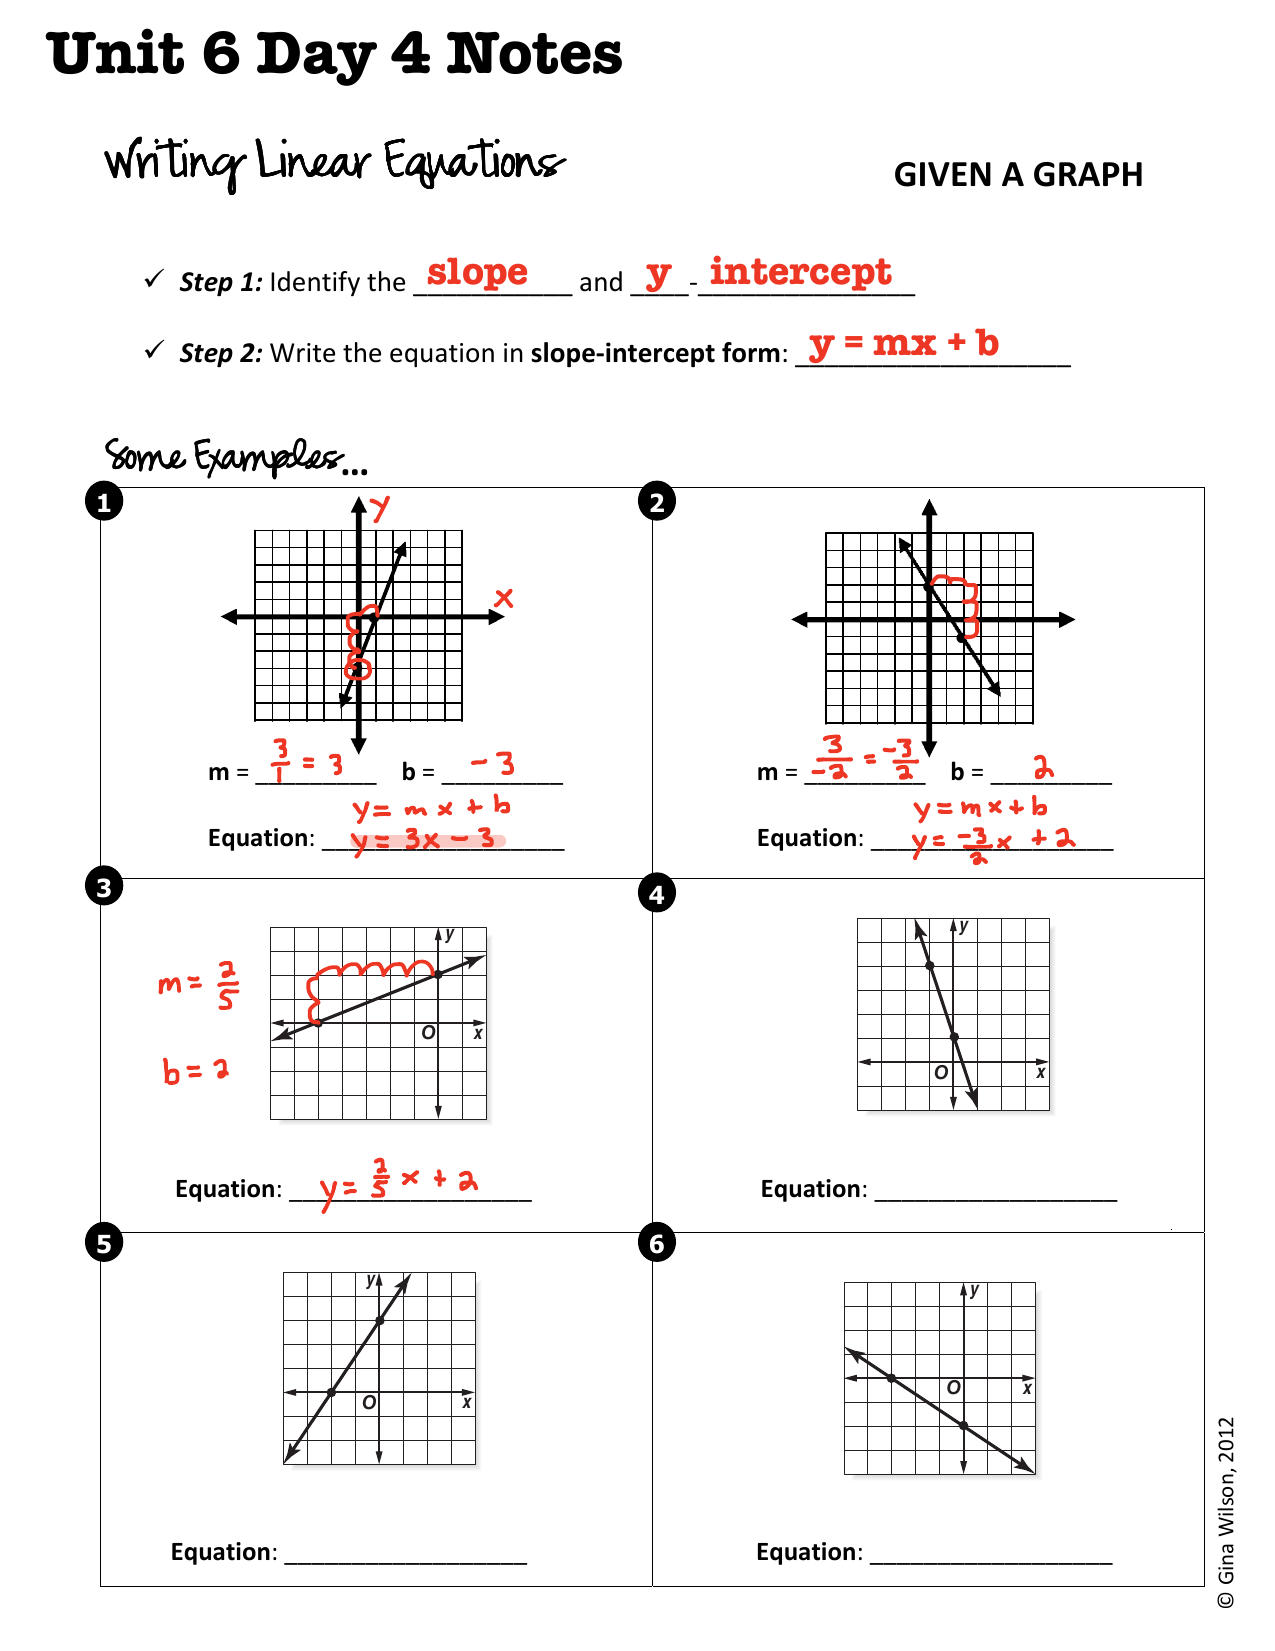 Writing Linear Equations Inside Writing Linear Equations Worksheet Answers